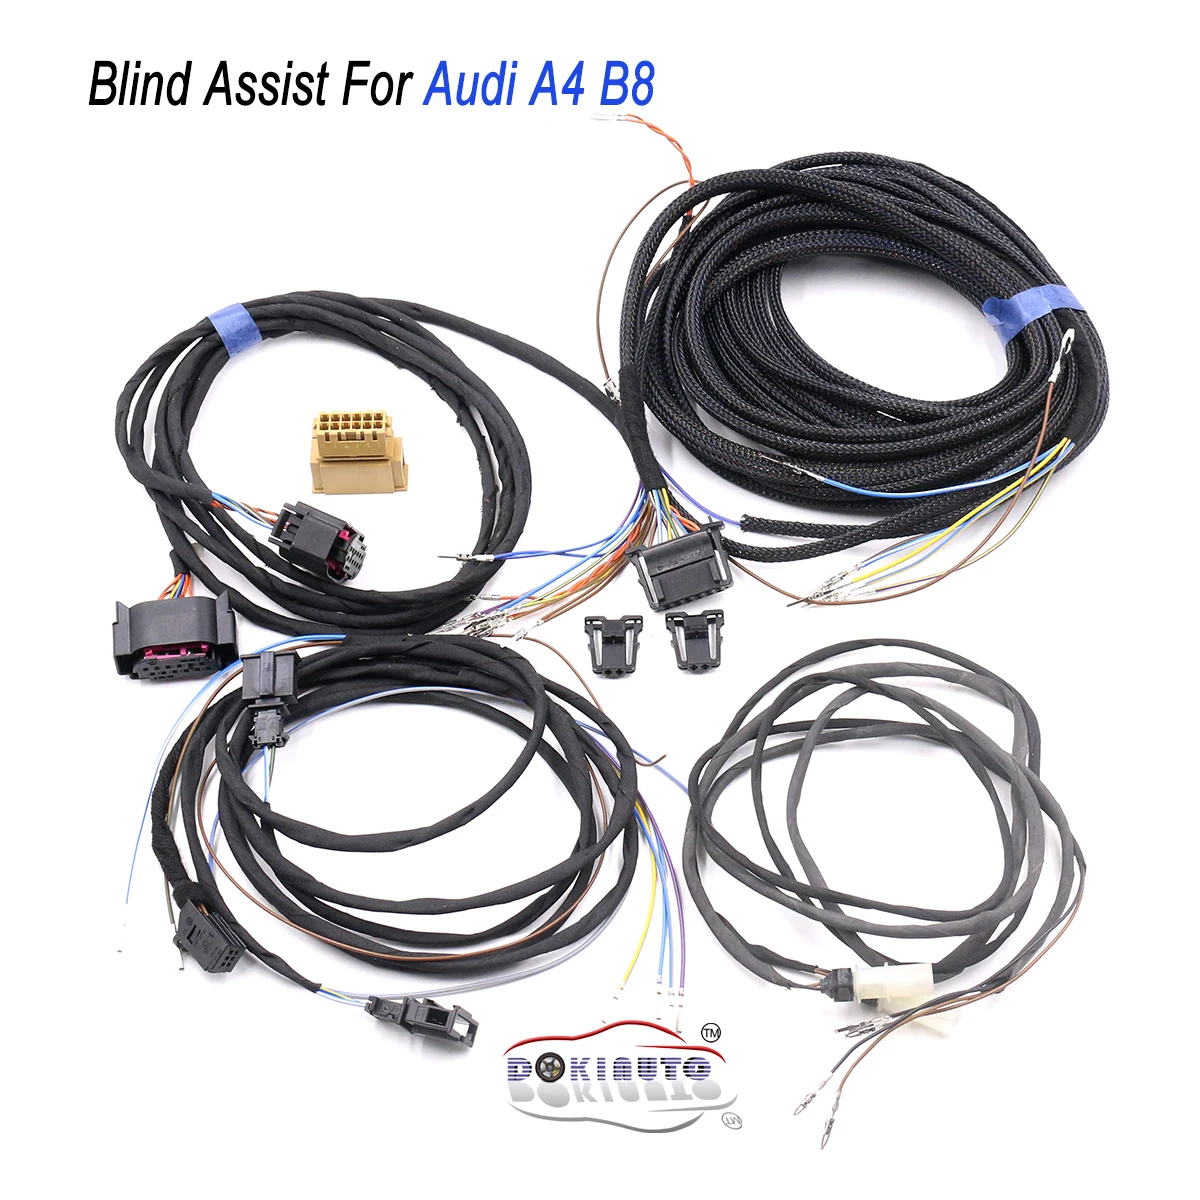 Blind Spot Side Assist Wire cable Harness For VW AUDI A4 B8 Q5 A5 B8 Facelift